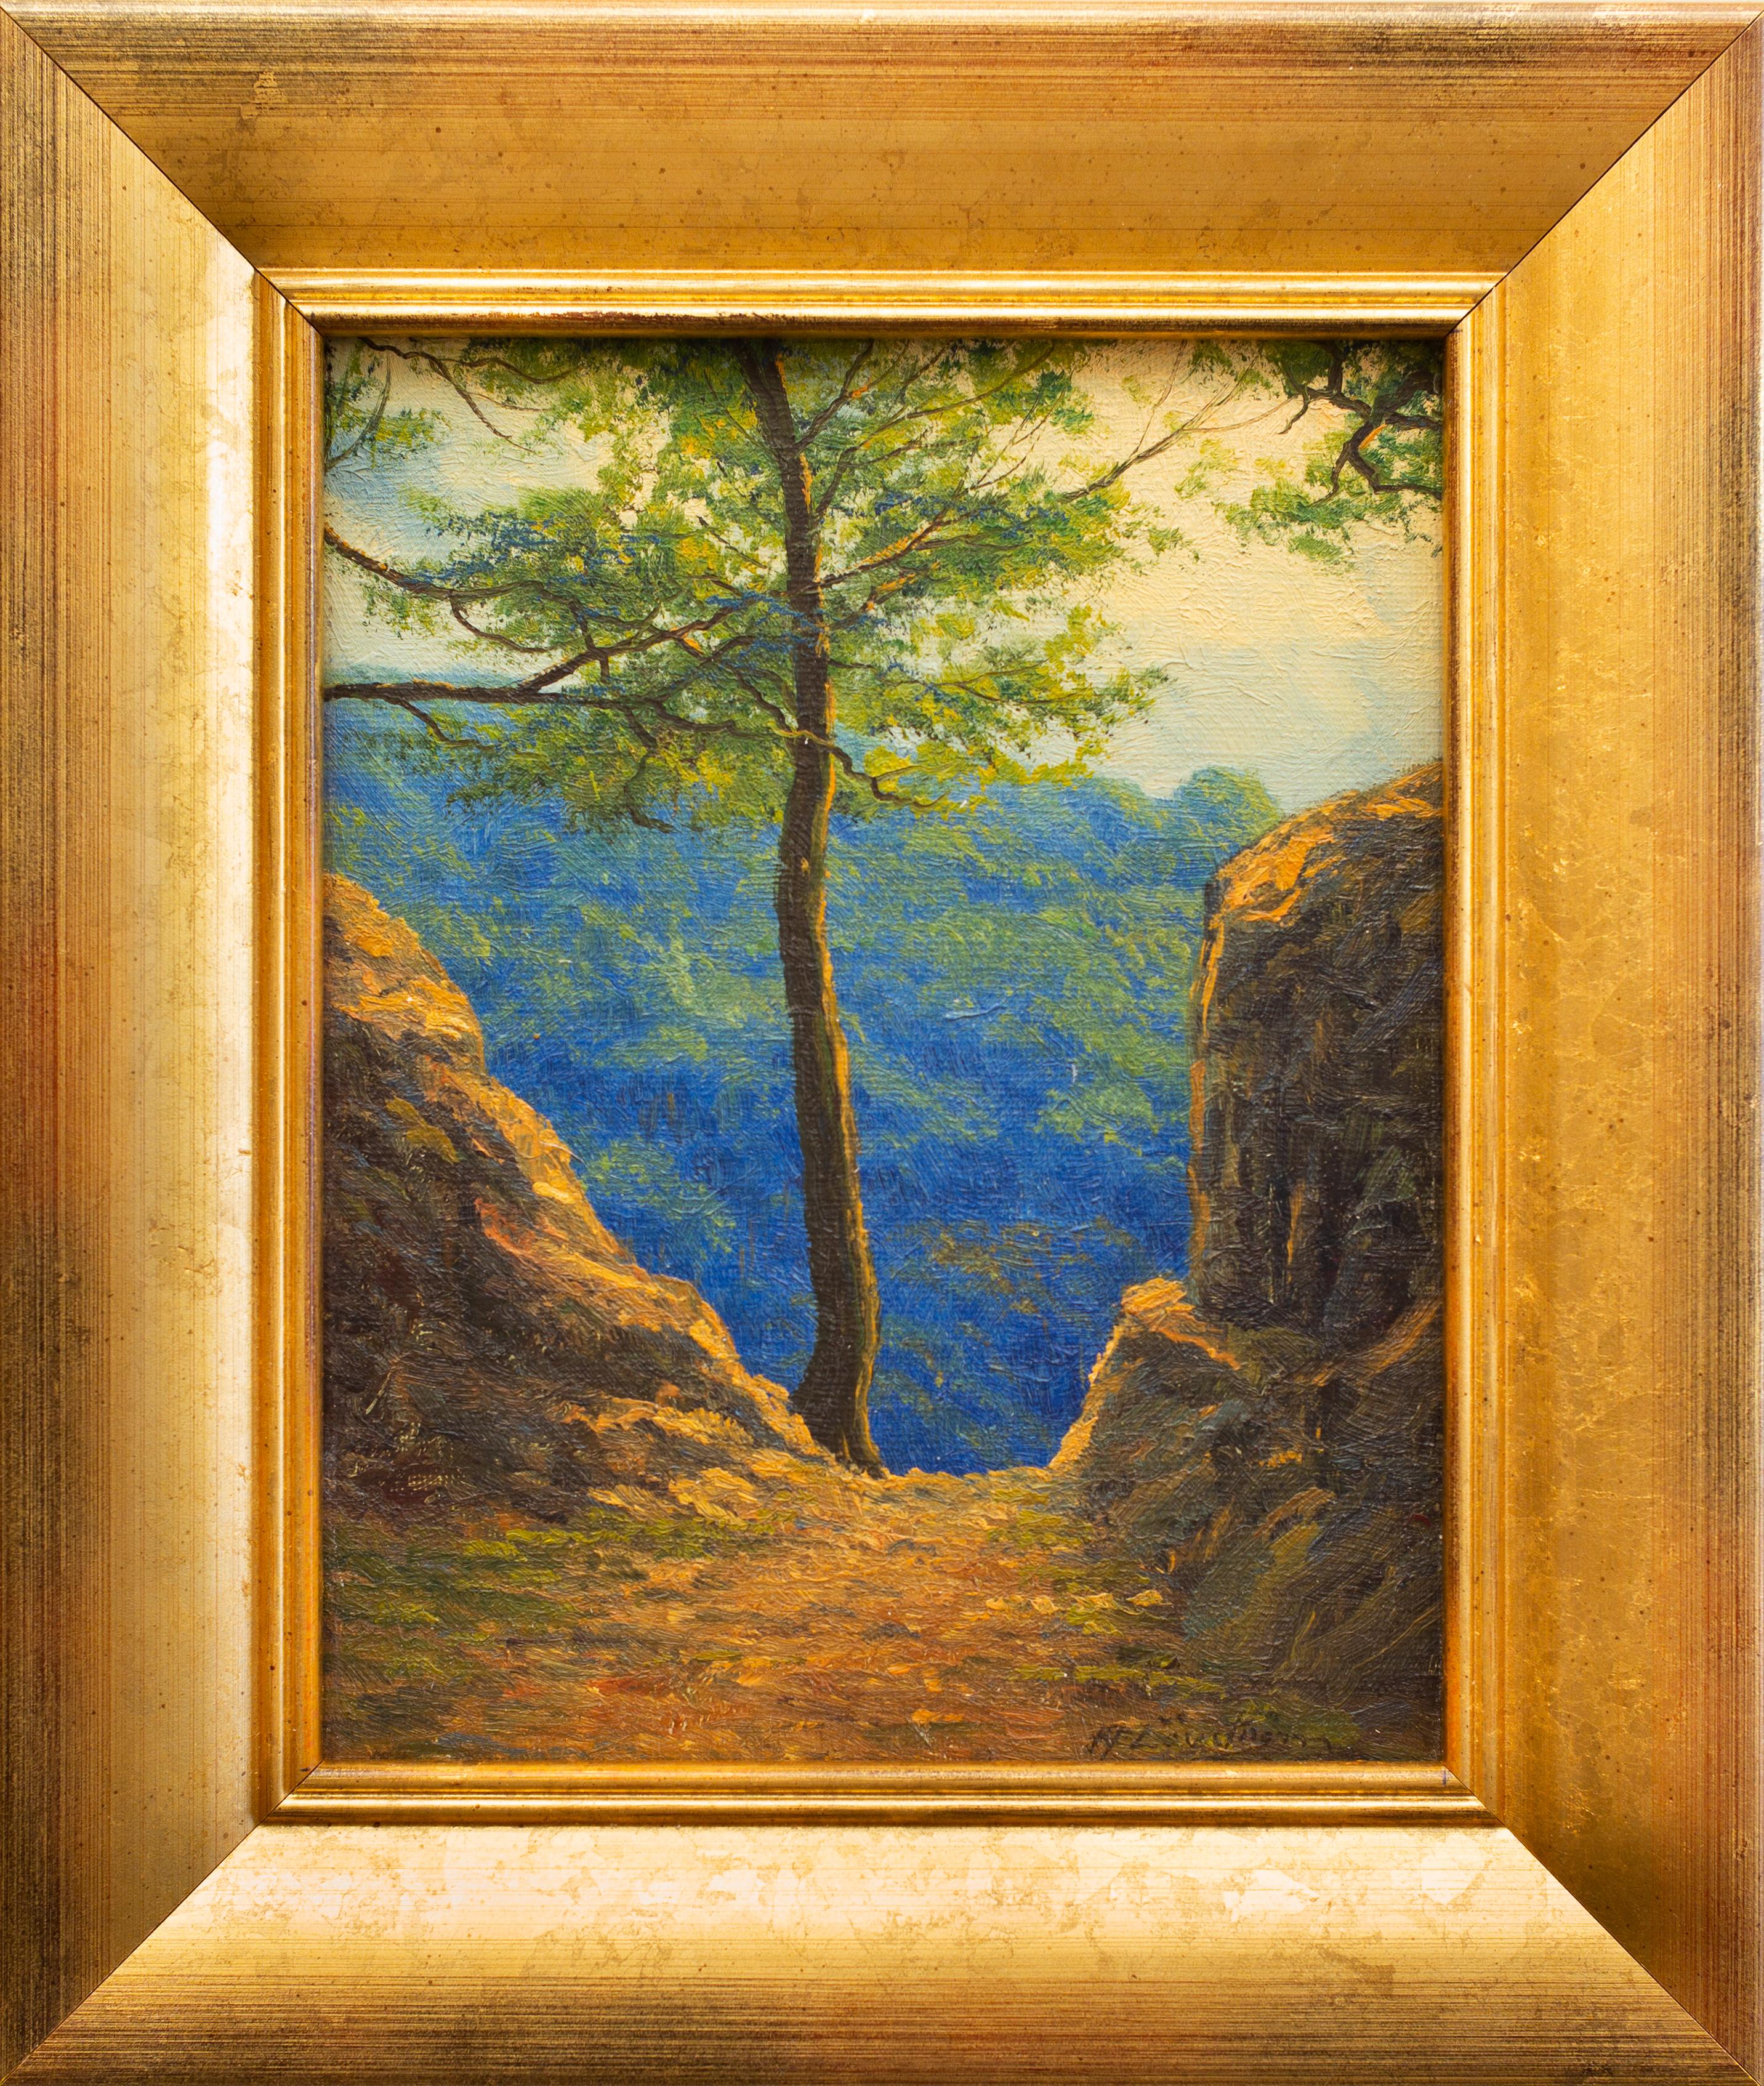 A Beautiful View at the End of the Road, c. 1940-50, Oil Painting on Canvas 